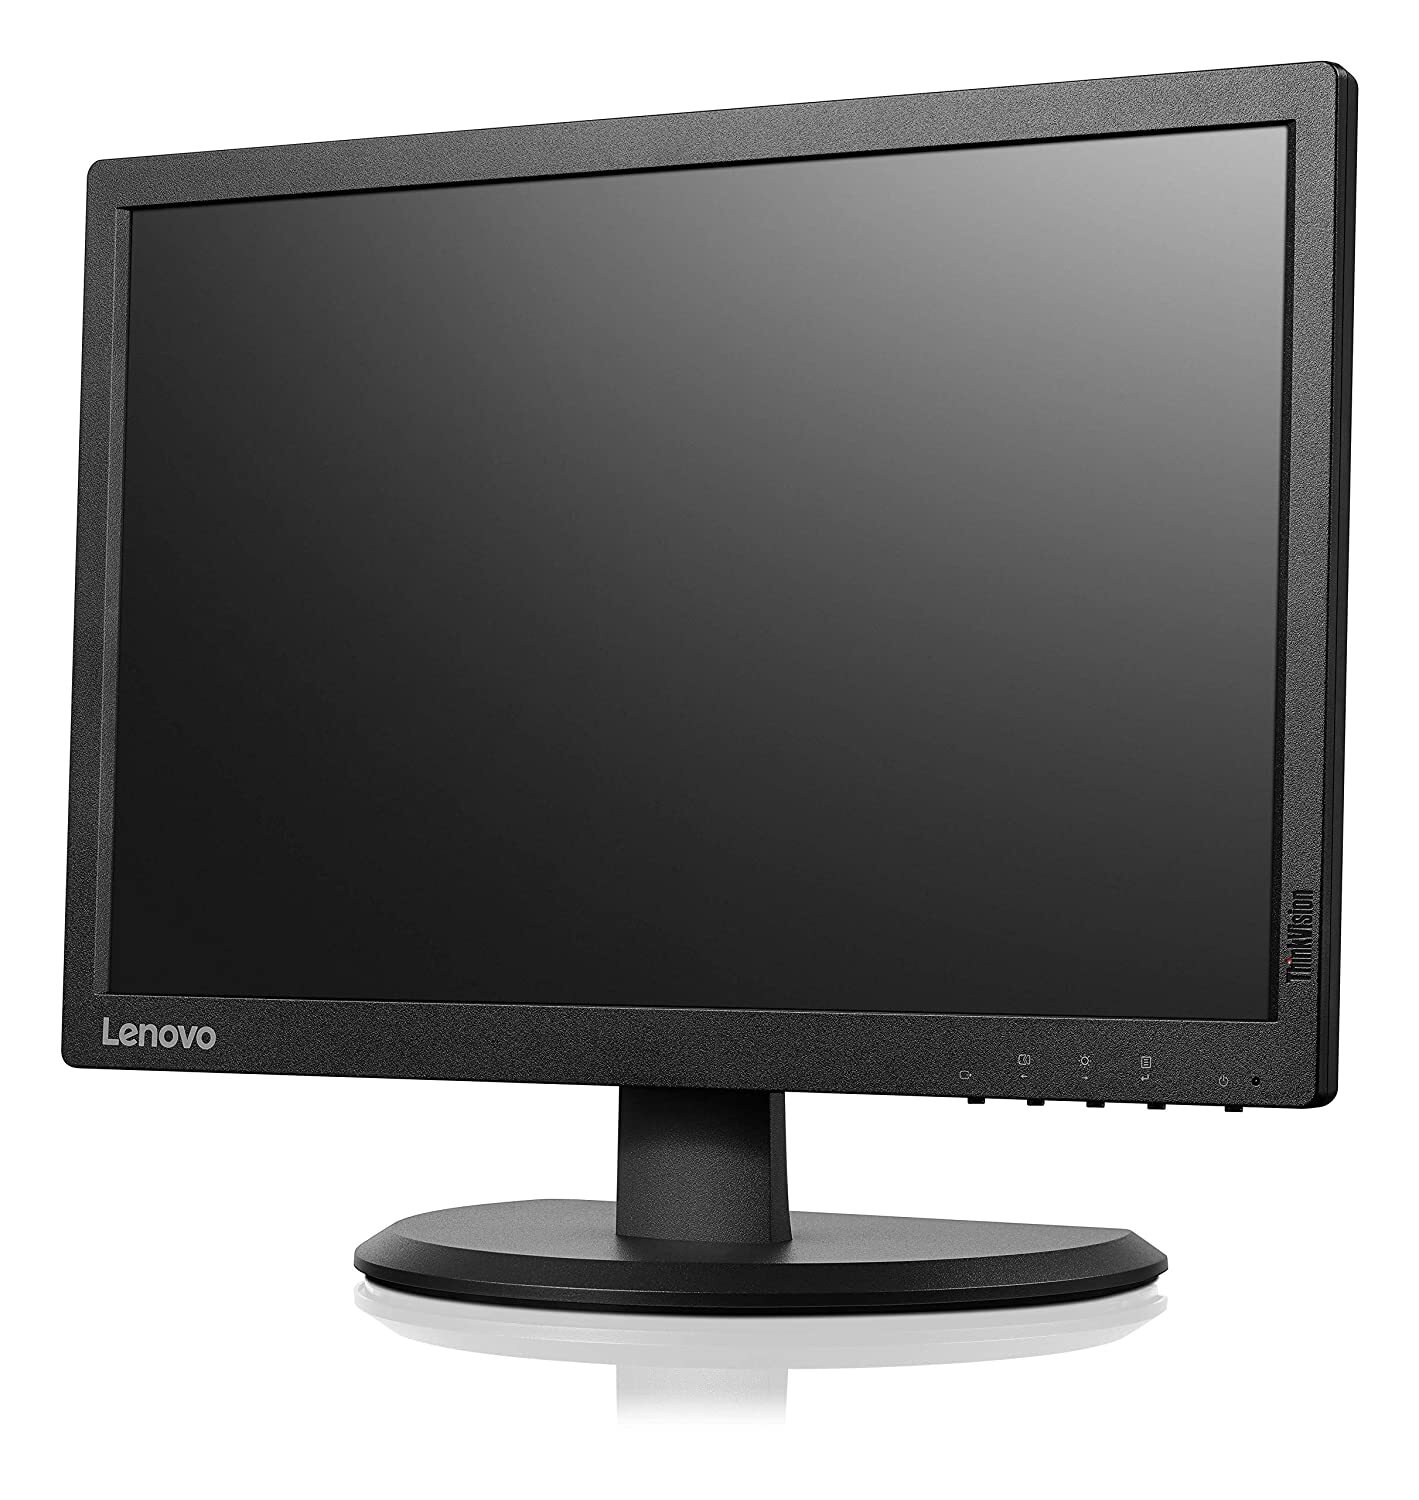 Lenovo Desktop A/O 330 F0D70070IN CDC-J4005 with 4GB RAM, 1TB HDD, DVD (RW), DOS Operating System and 19.5" Monitor-M000000000373 www.mysocially.com